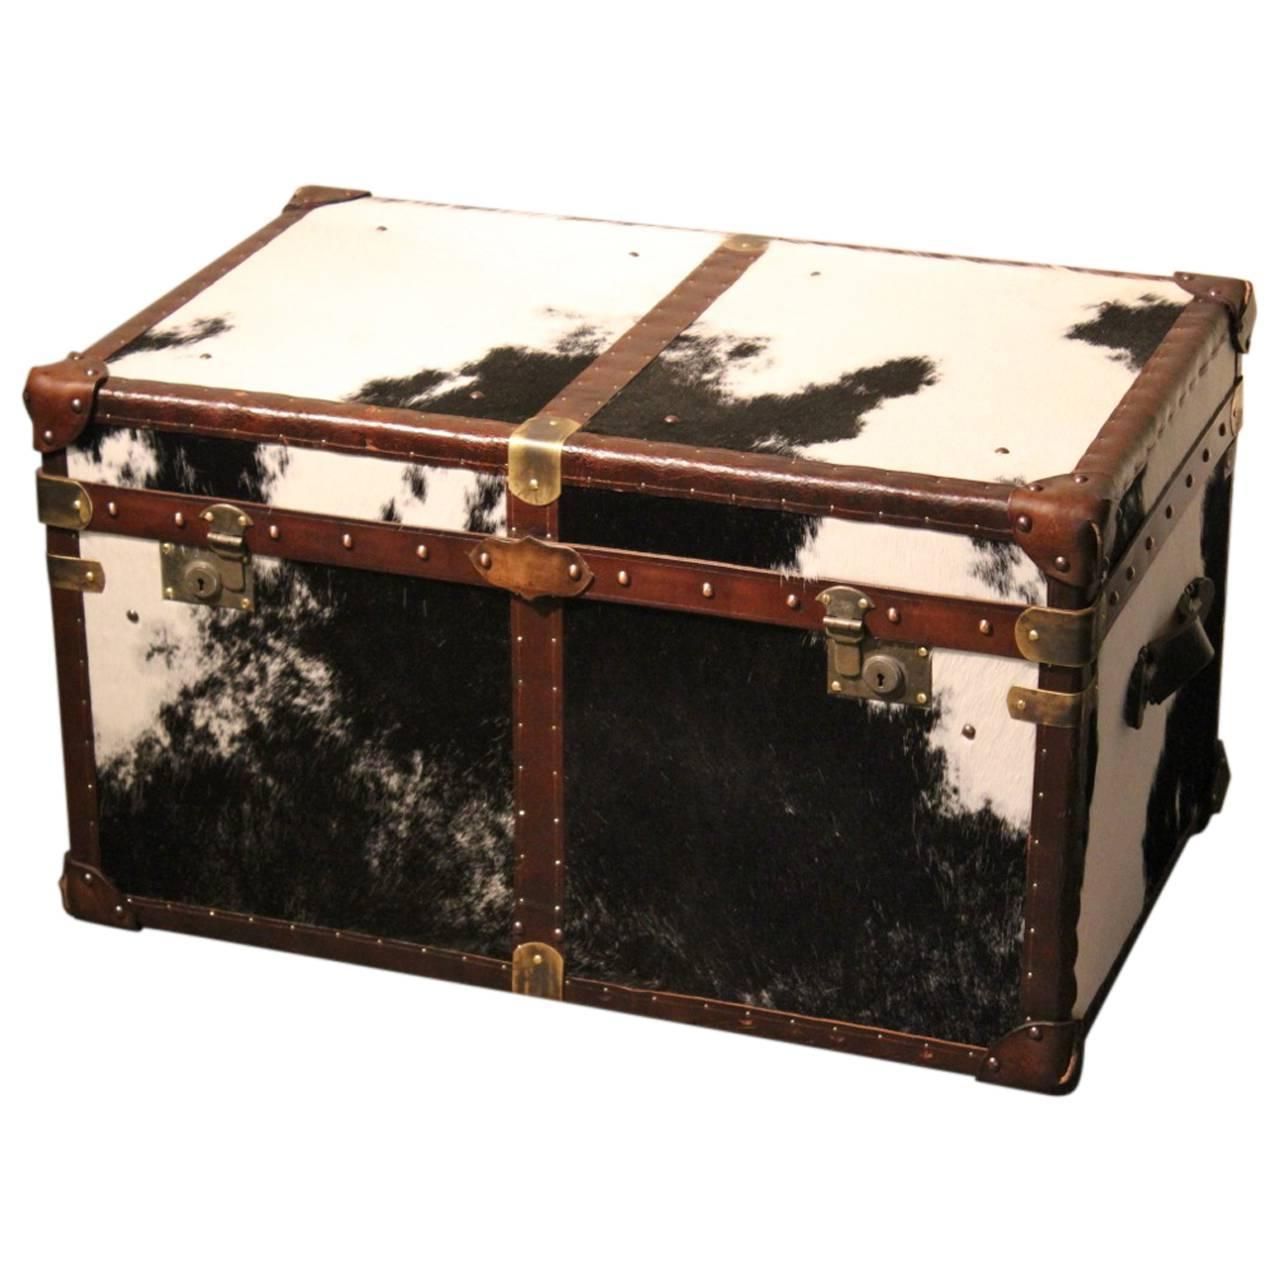 Bespoke Cowhide Trunk / Coffee Table At 1stdibs Regarding Latest Espresso Wood Trunk Cocktail Tables (View 10 of 20)